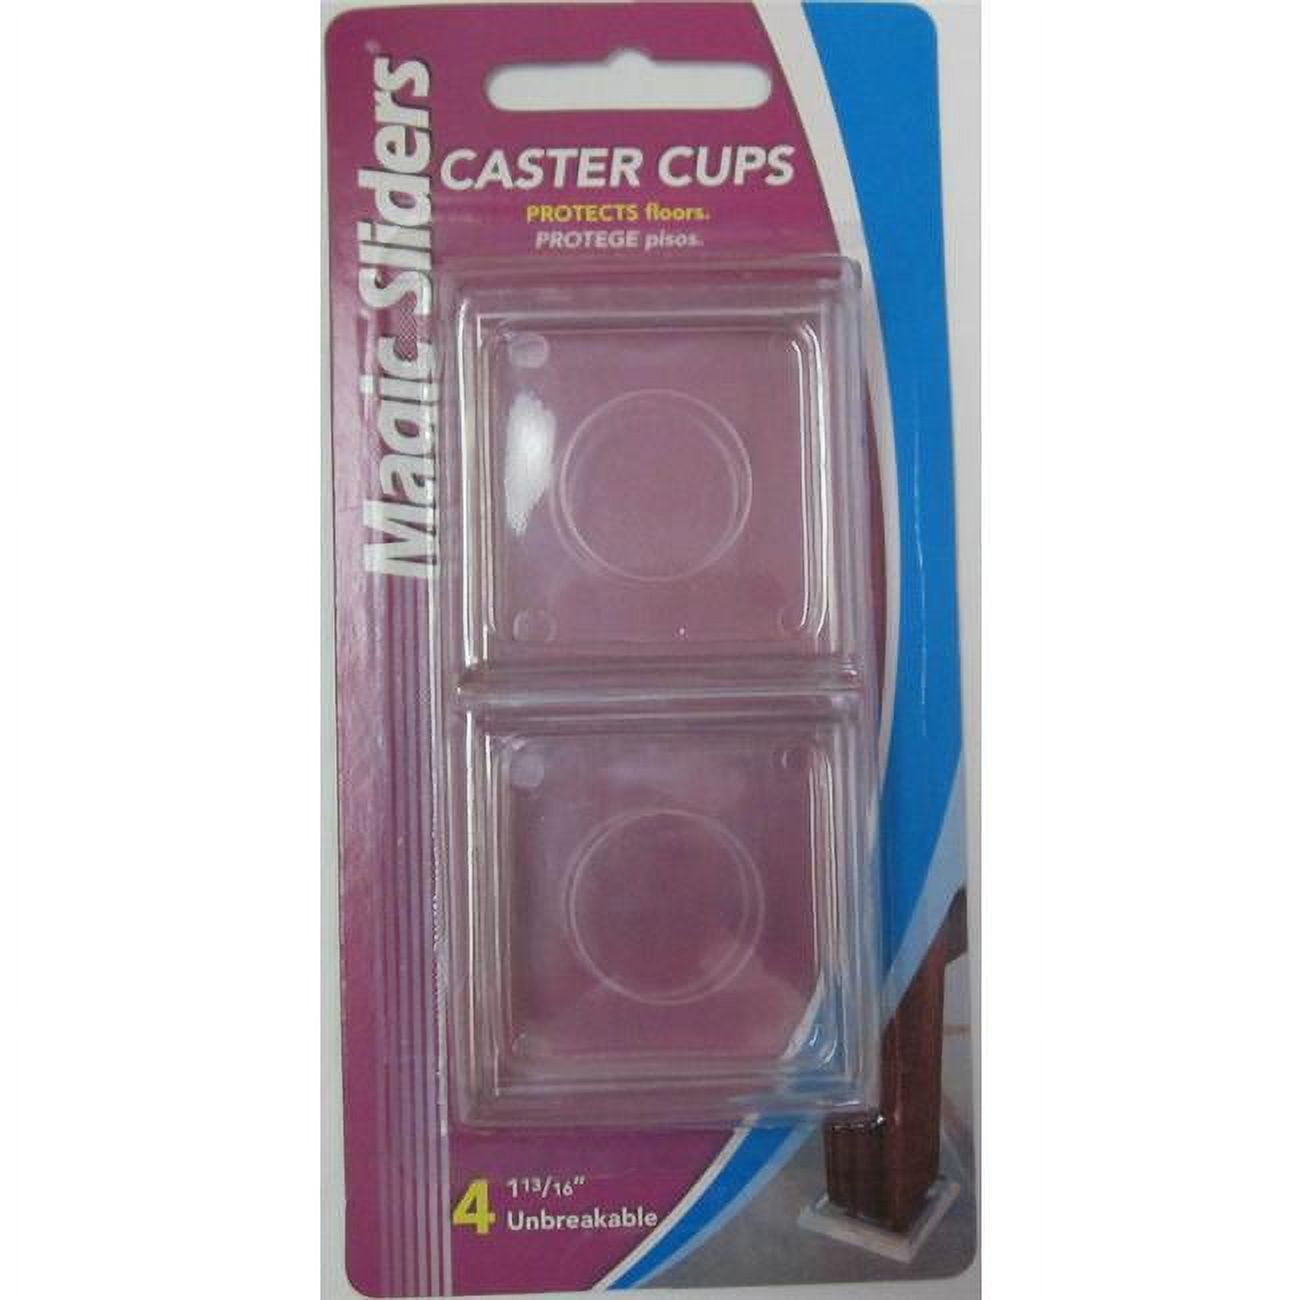 5865472 1.81 X 1.81 In. Clear Plastic Protective Pads - 4 Per Pack & Pack Of 6